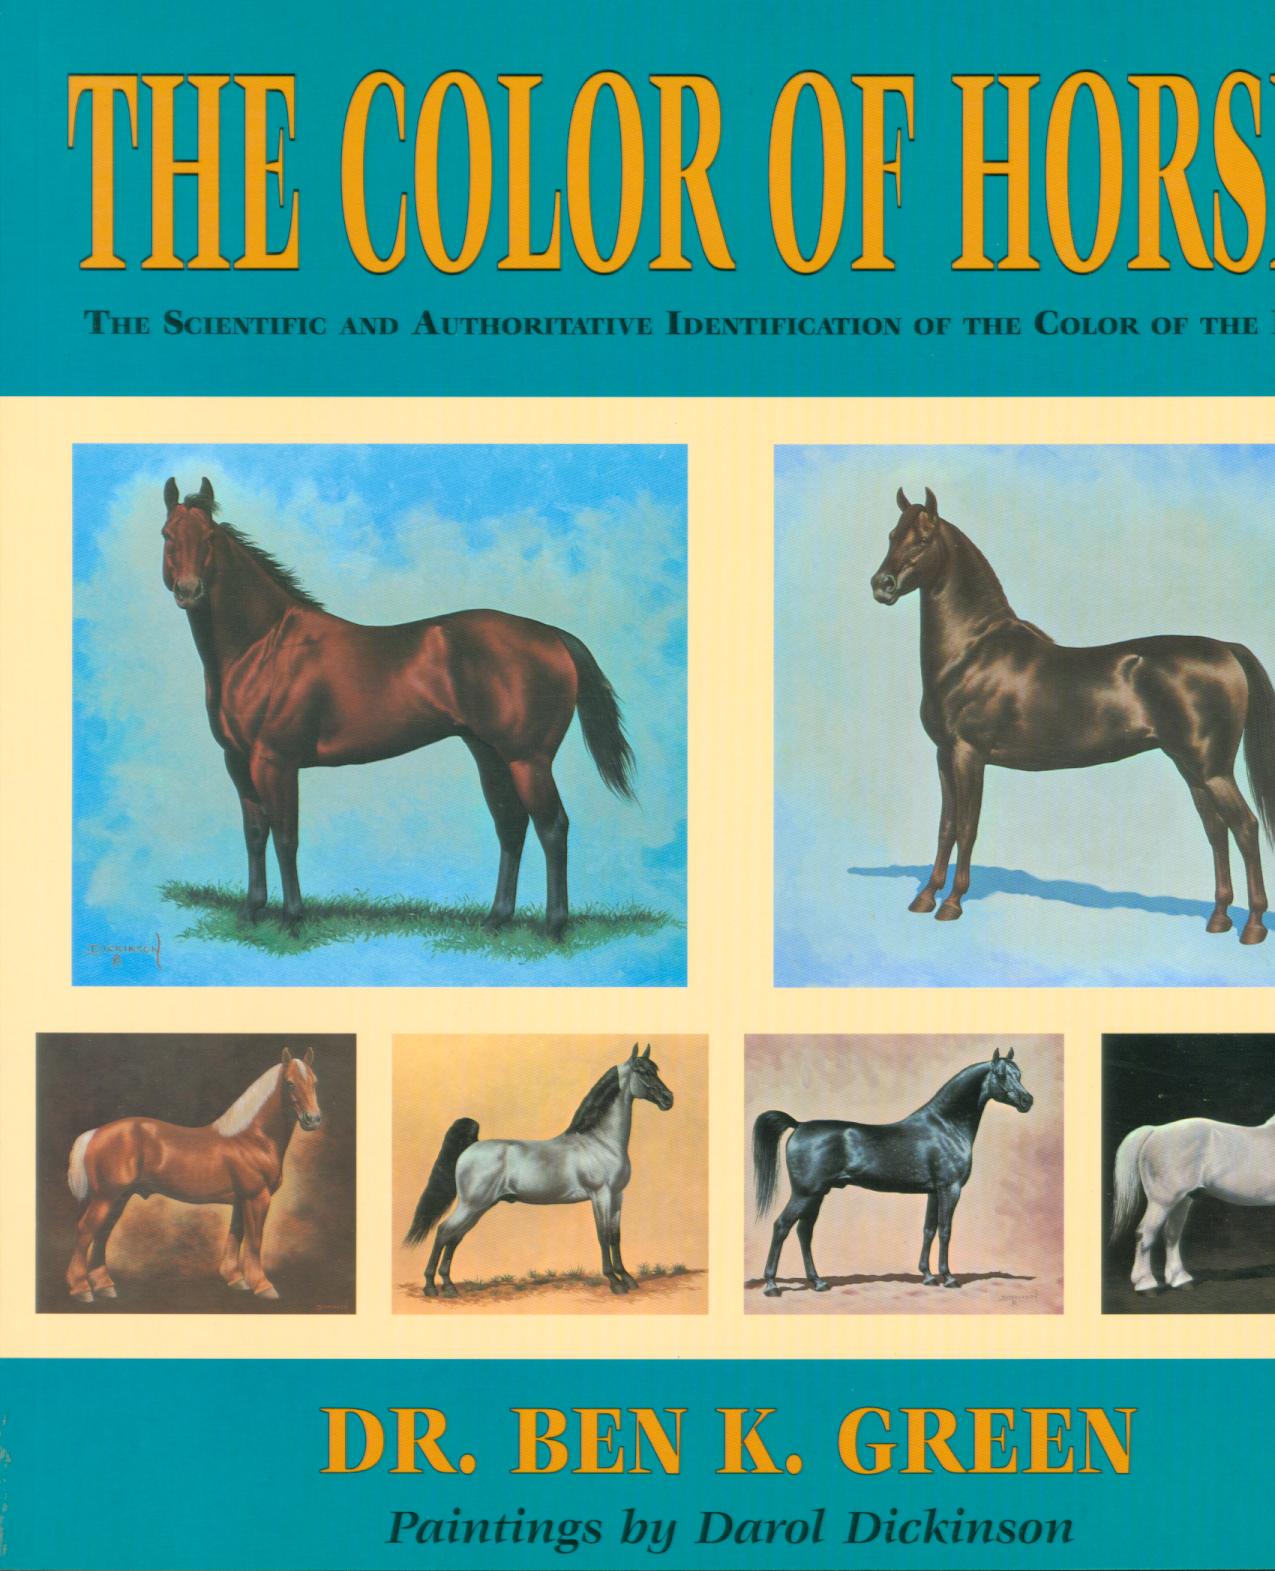 THE COLOR OF HORSES.